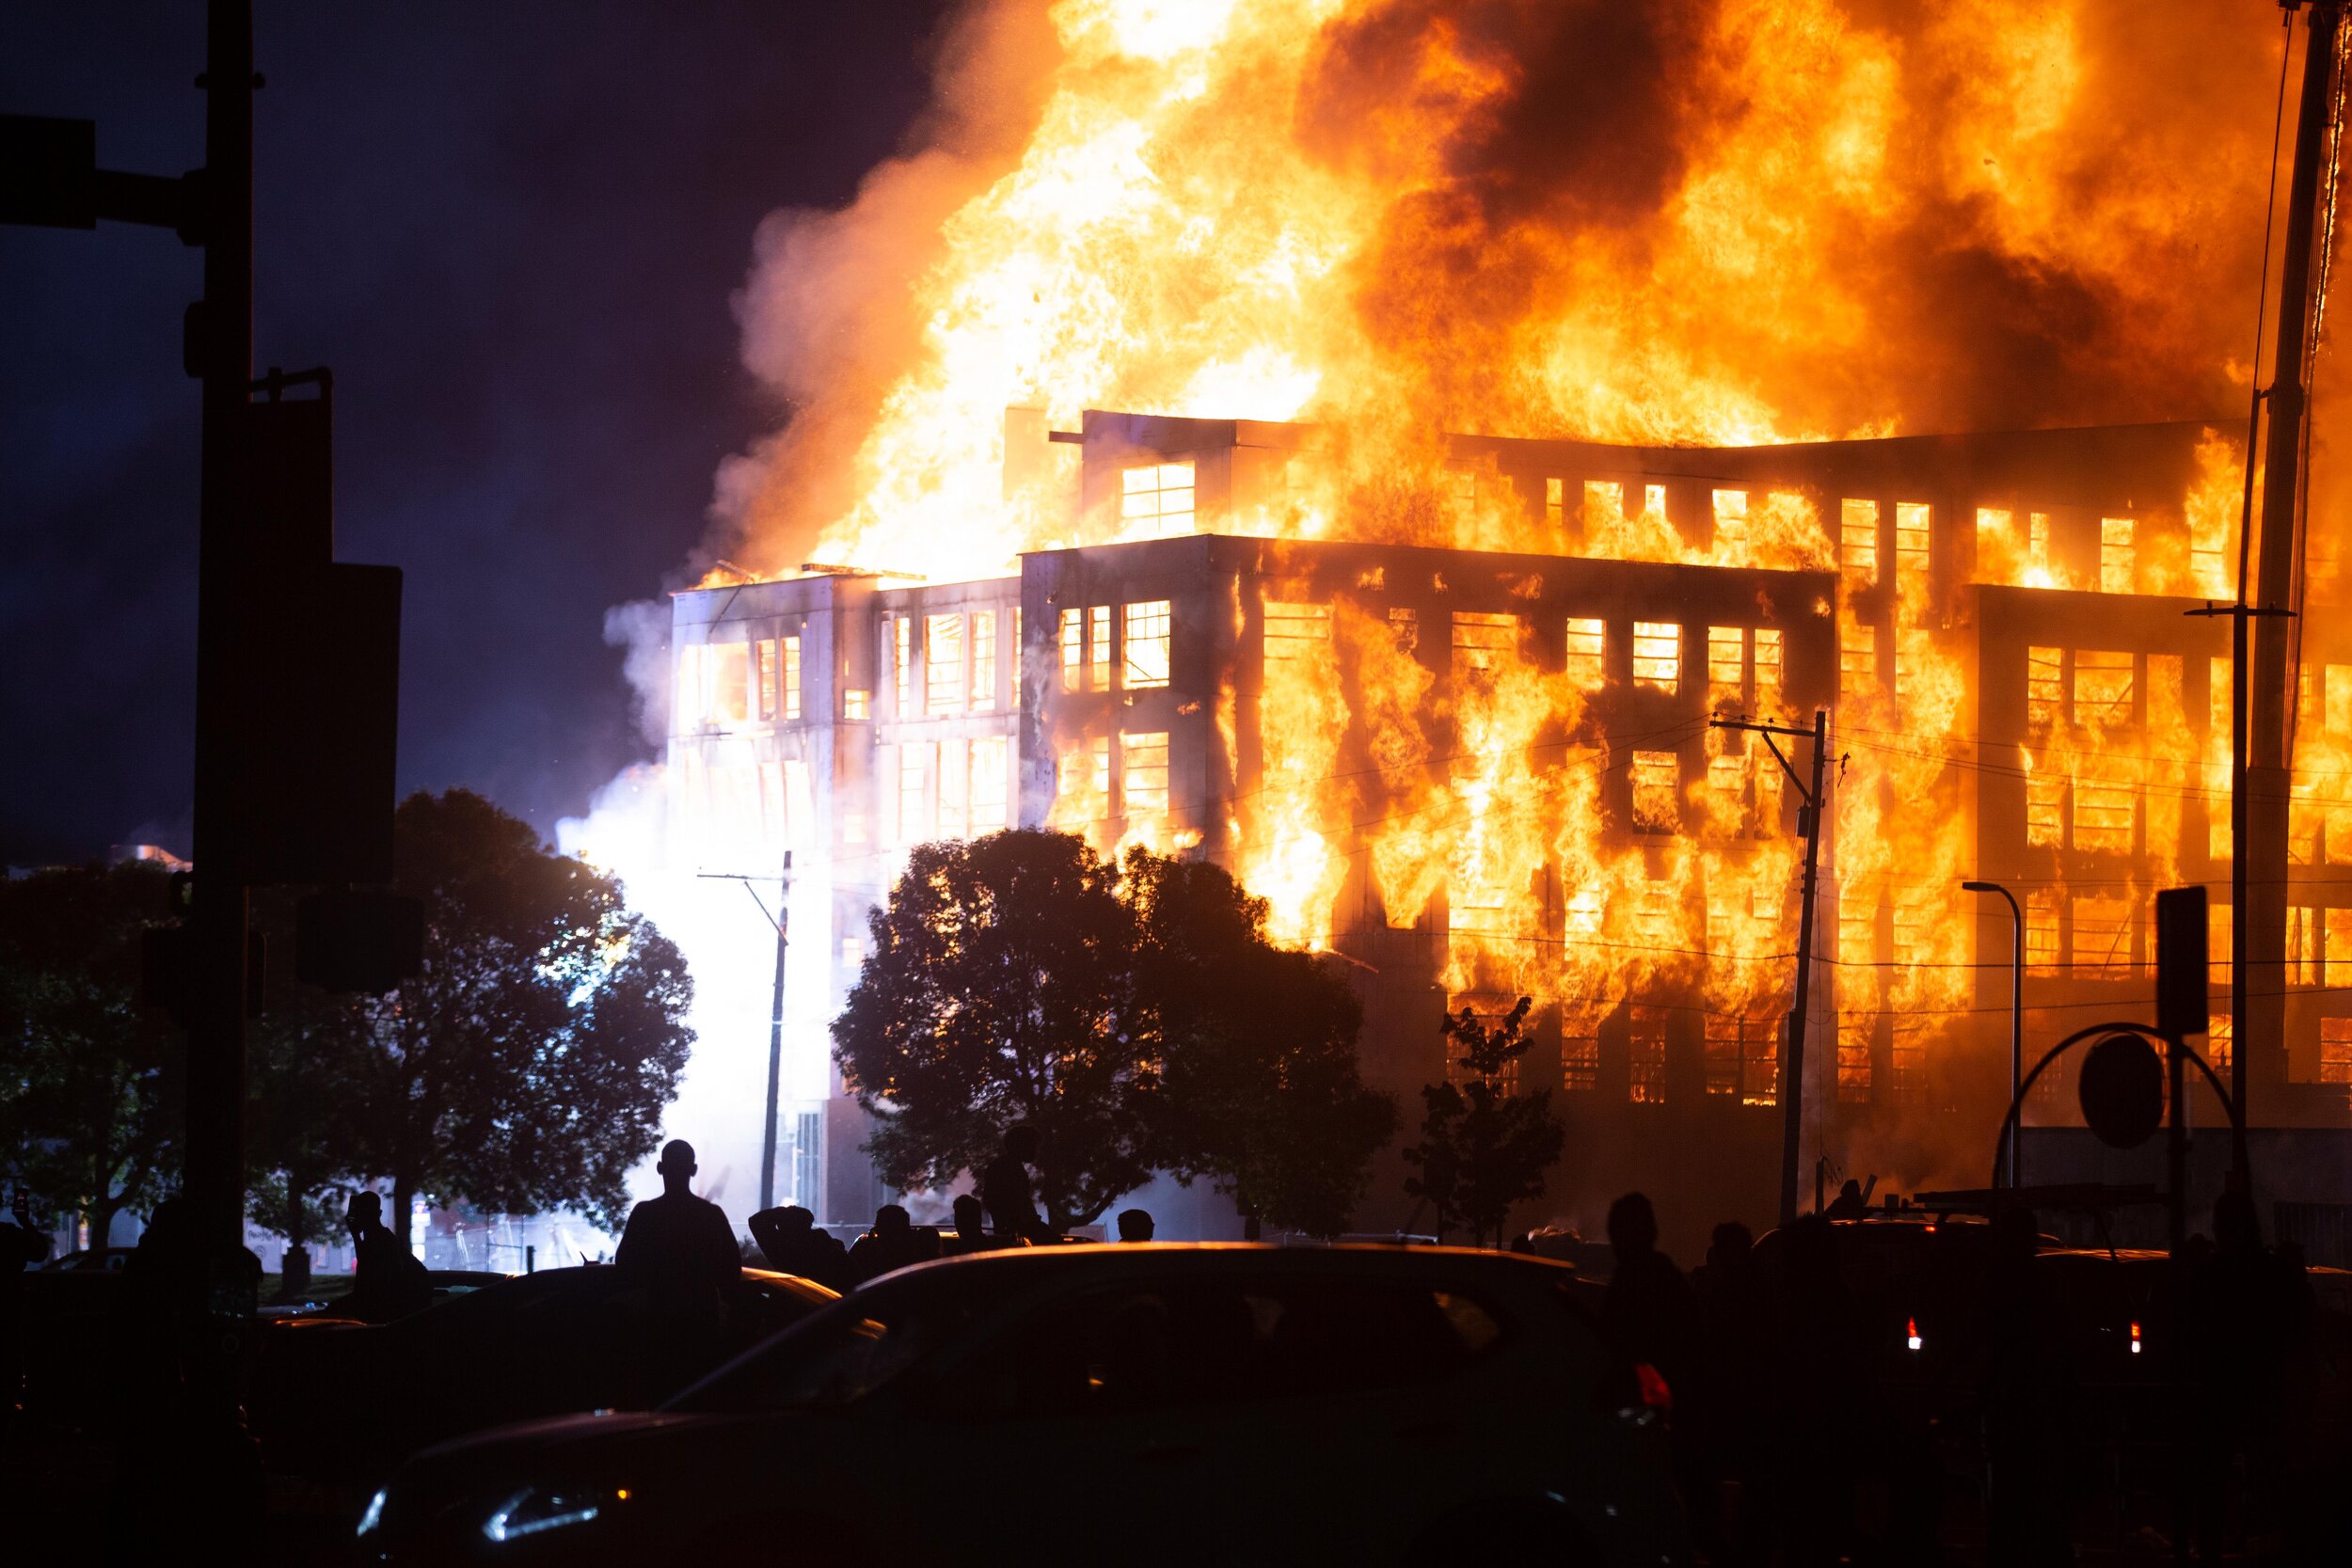  Transformers explode as a 190 unit affordable housing complex that was under construction burns after it was set on fire during a riot over the police killing of George Floyd in Minneapolis, Minnesota on May 28. 